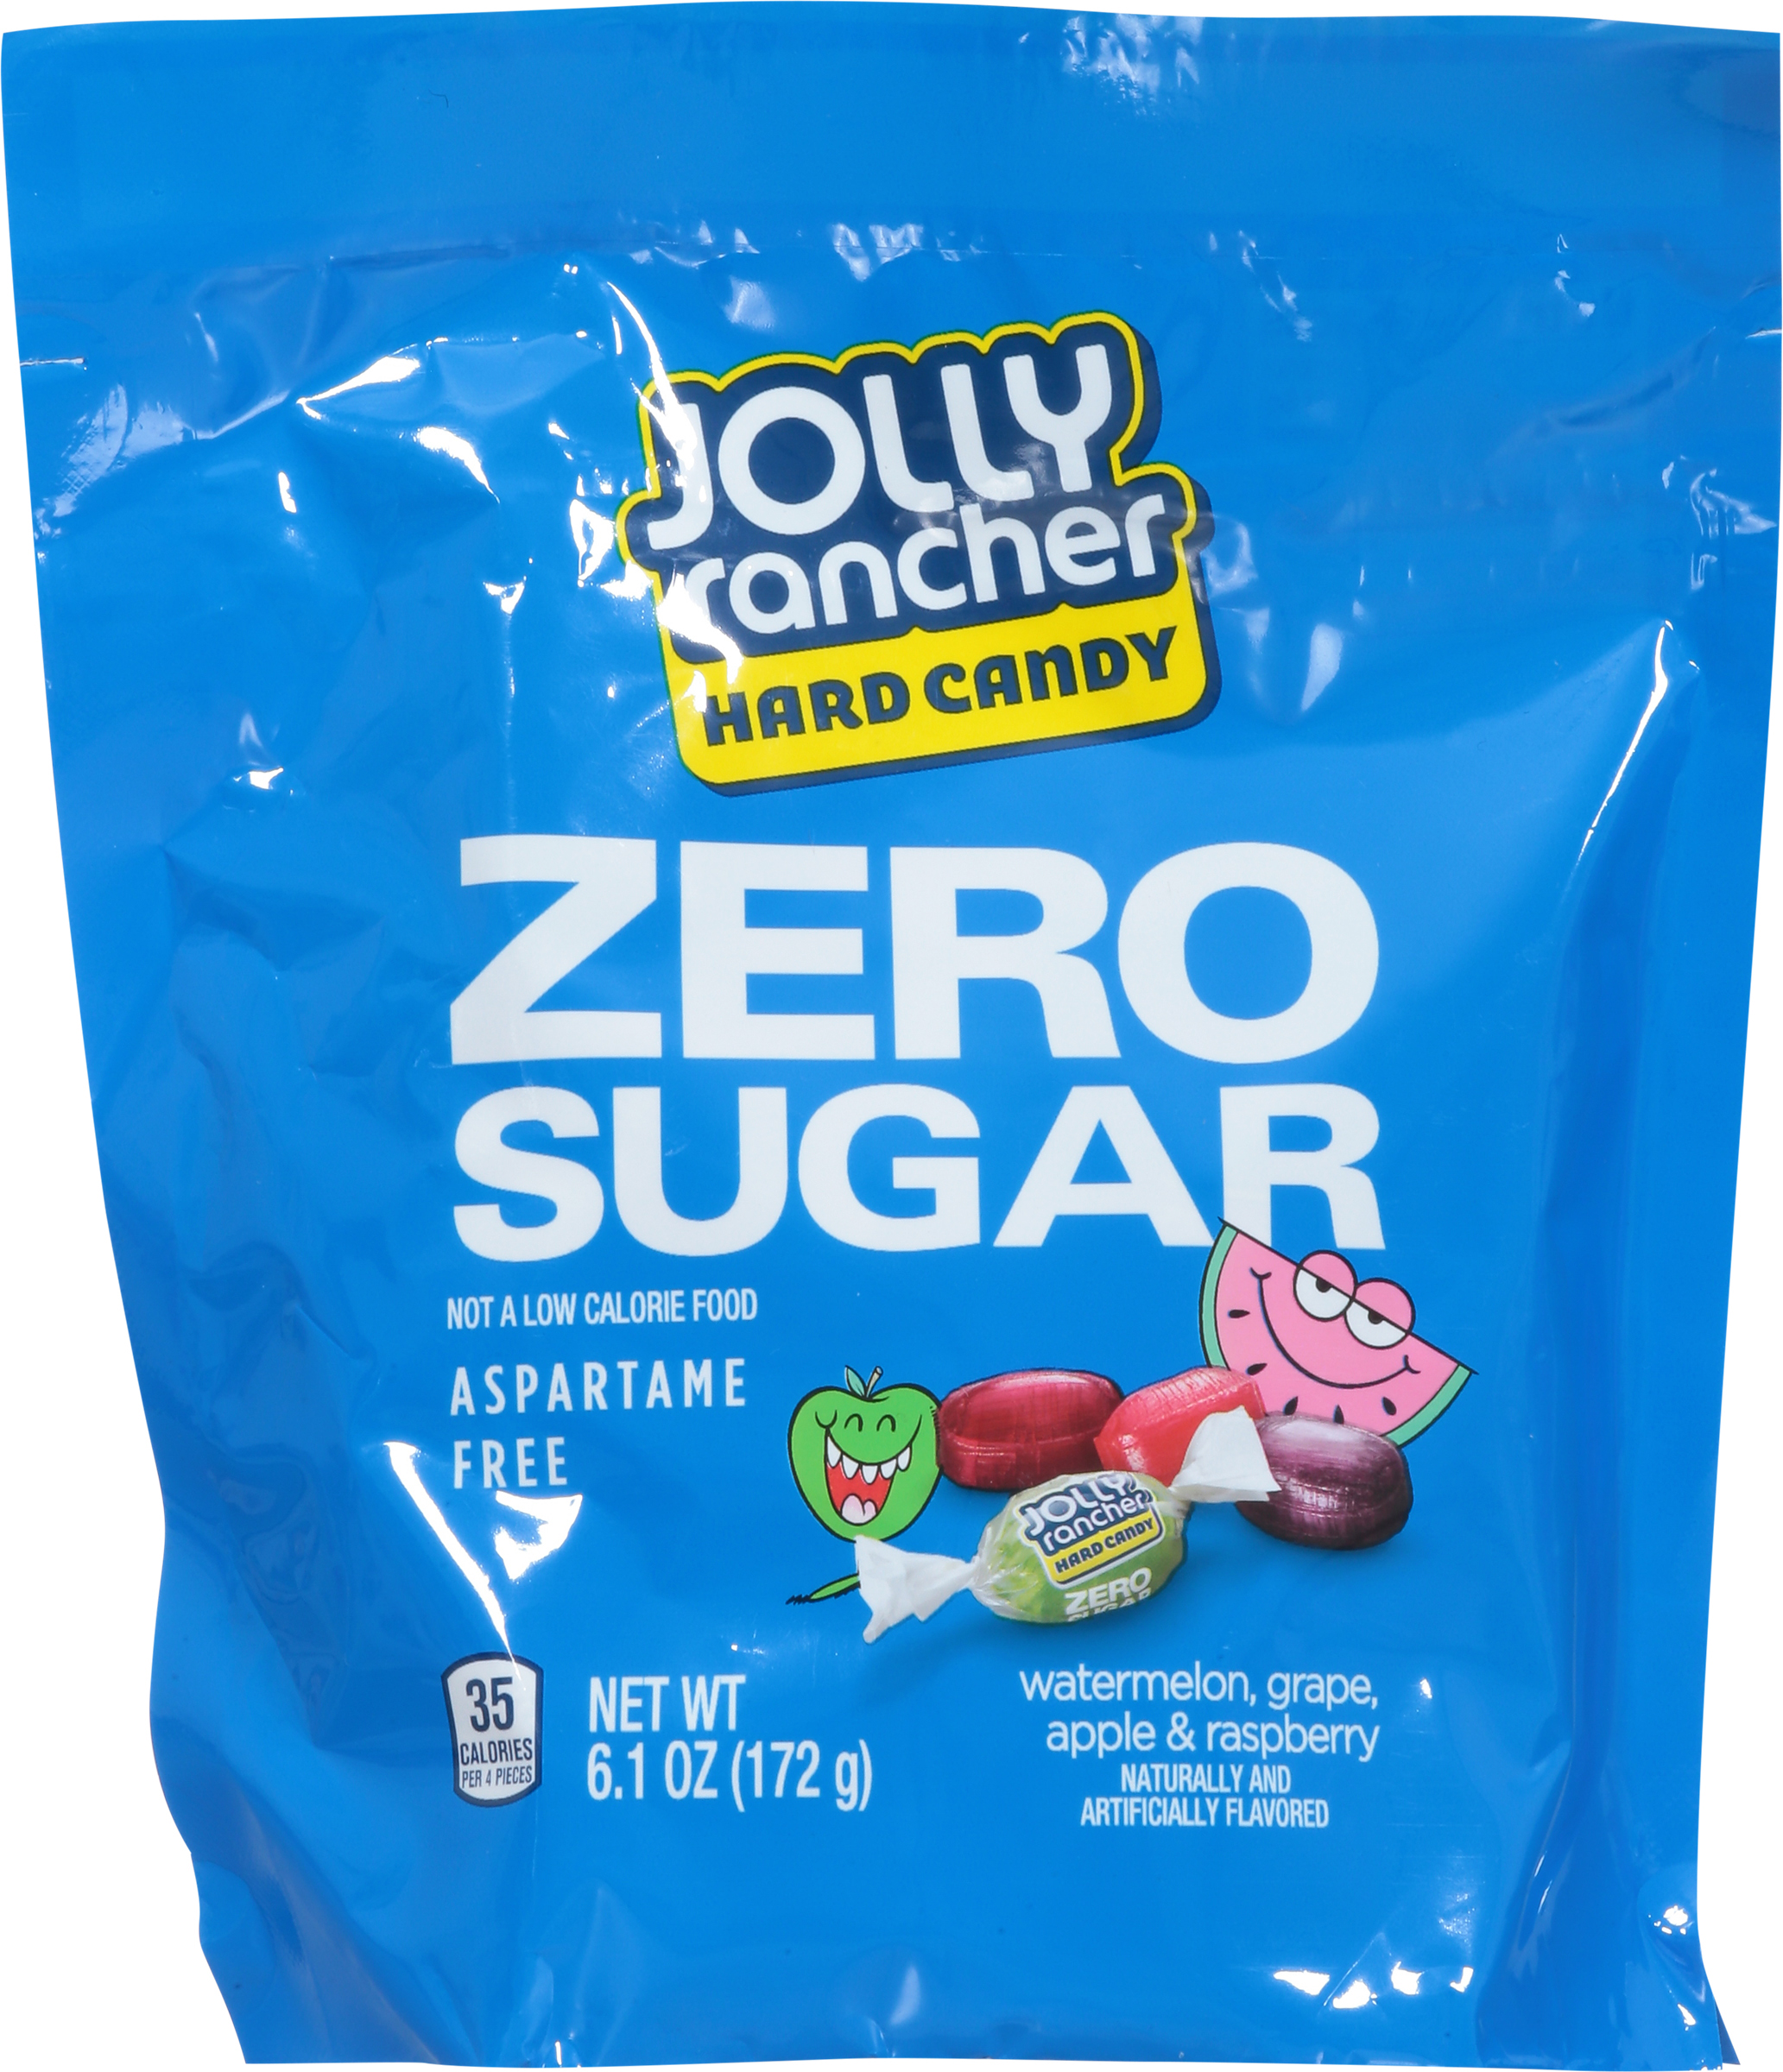 Calories in Hard Candy, Zero Sugar from Jolly Rancher